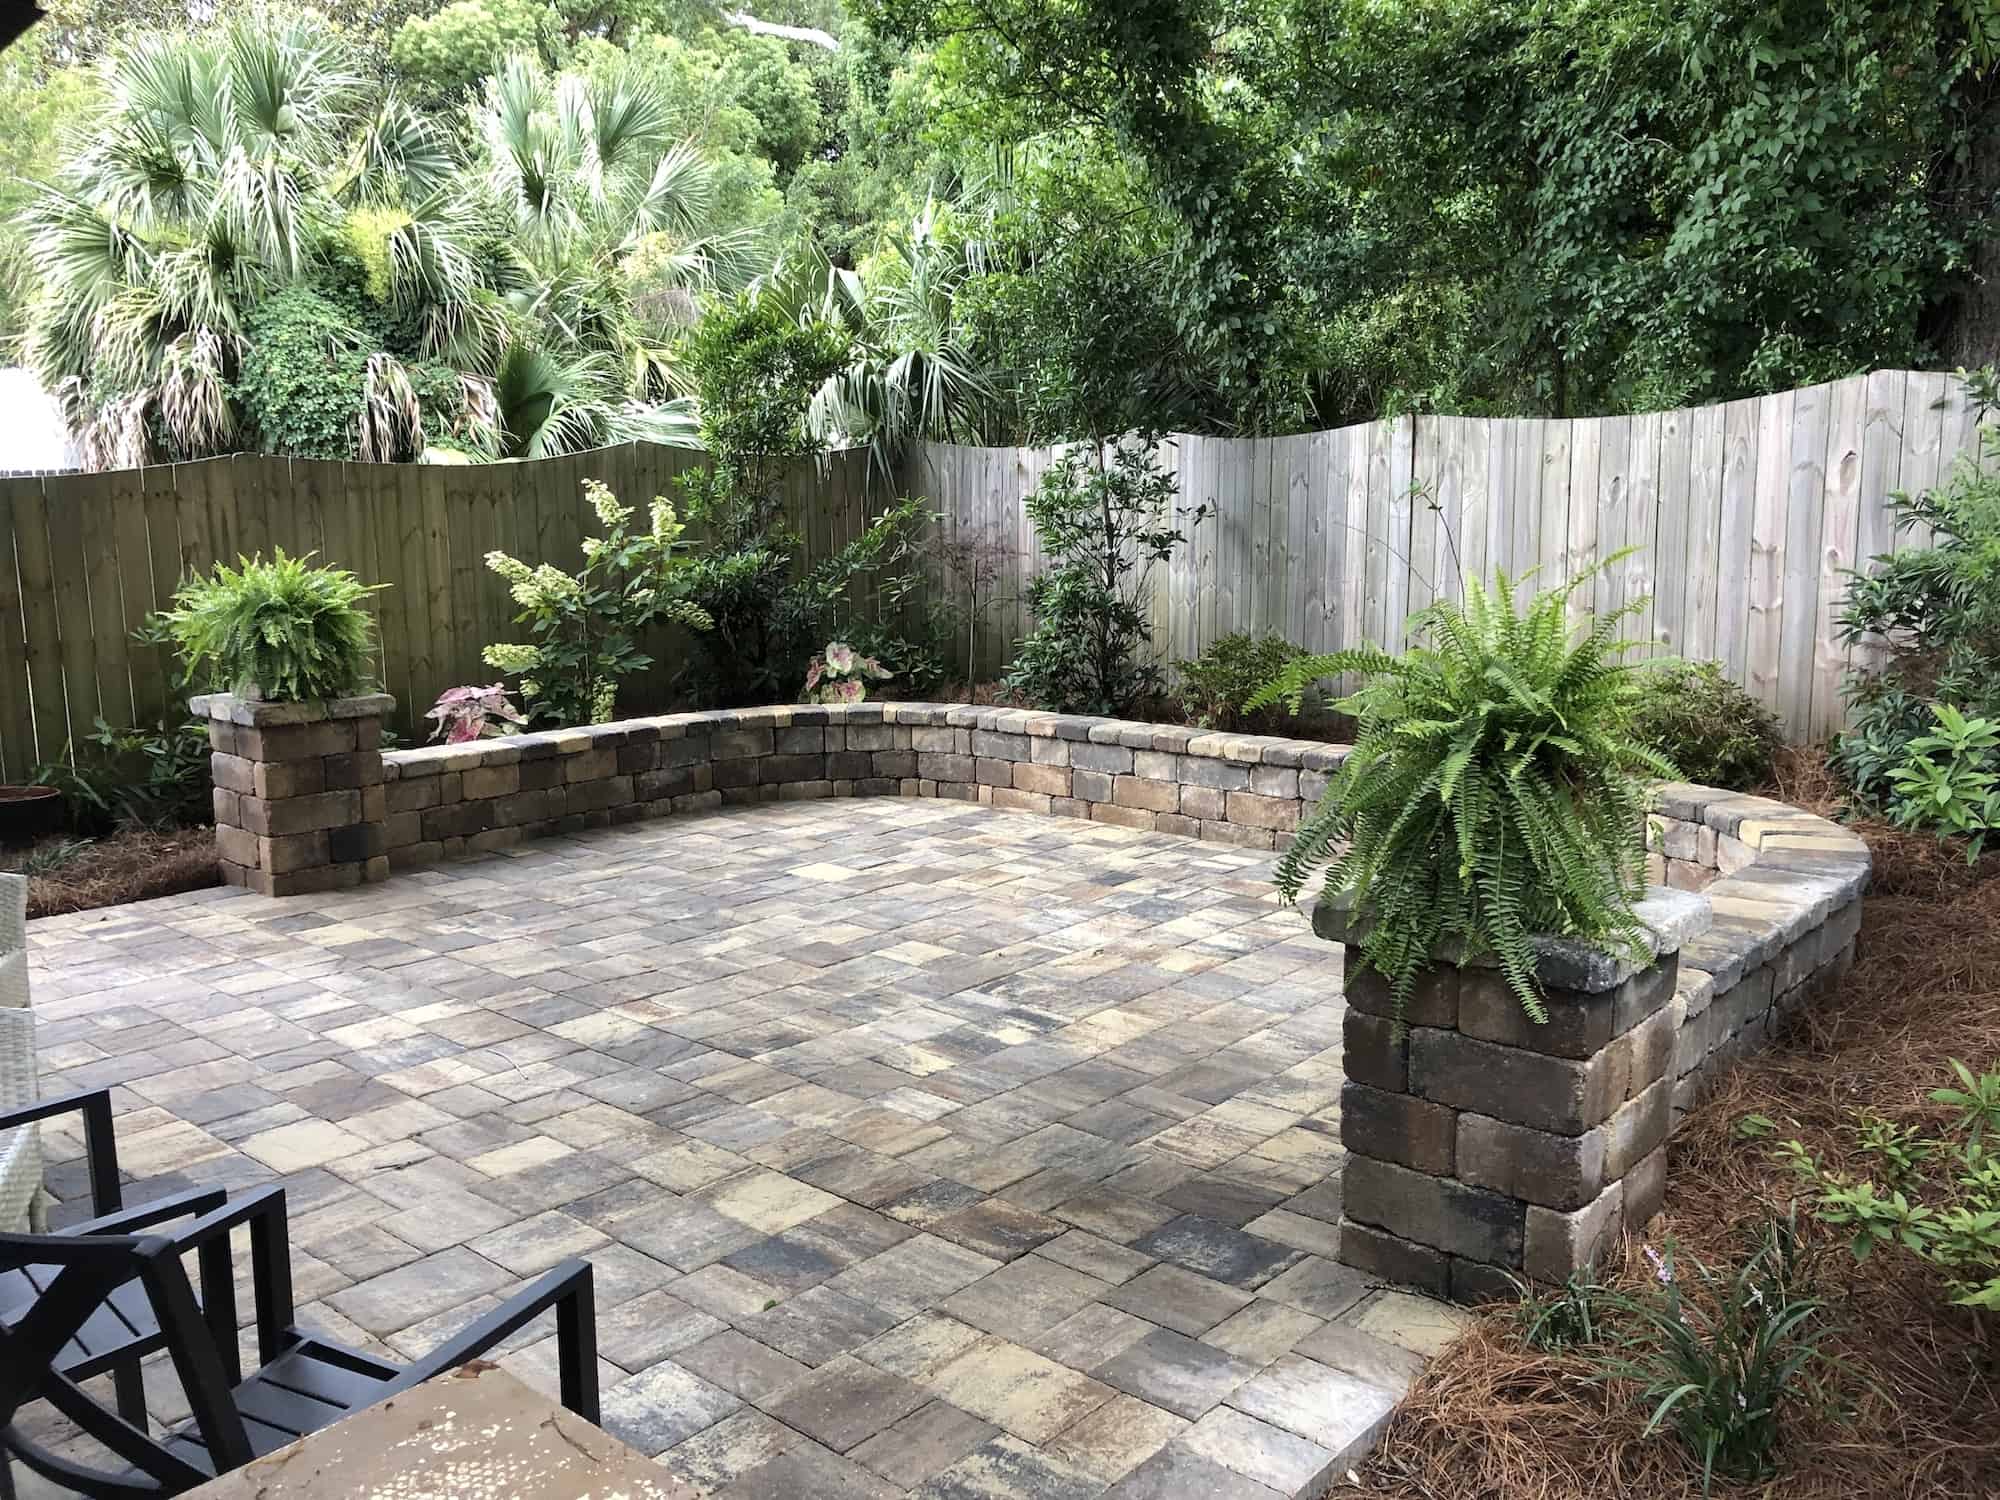 Backyard stone patio with brick/stone wall surrounded by various potted/planted plants in straw